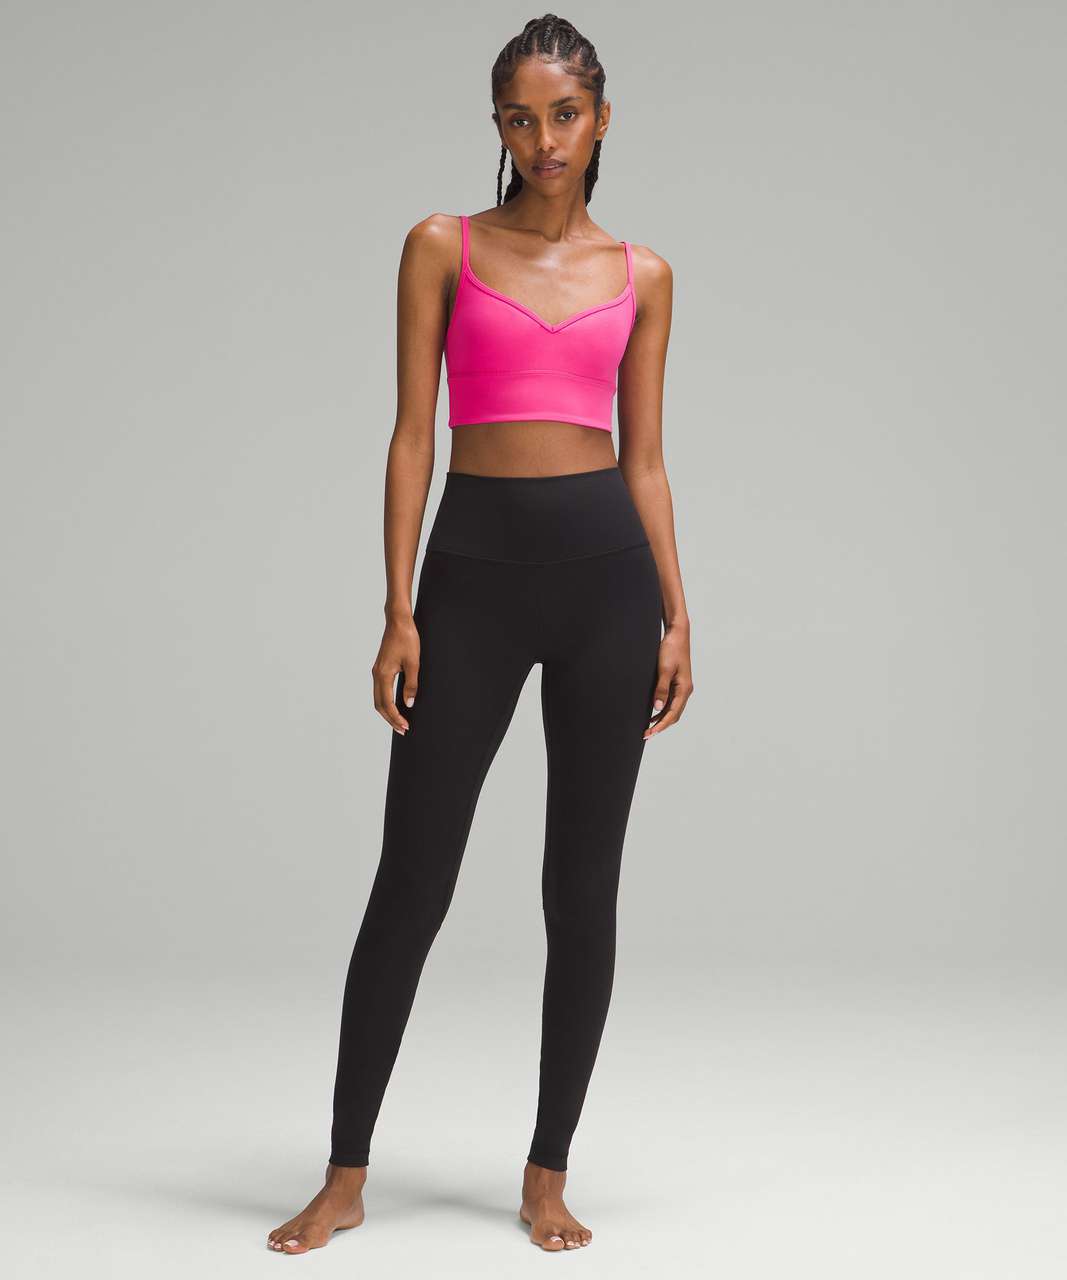 Lululemon Align Bra A/B Cup 10 Pink Size M - $35 (39% Off Retail) - From  Ashley